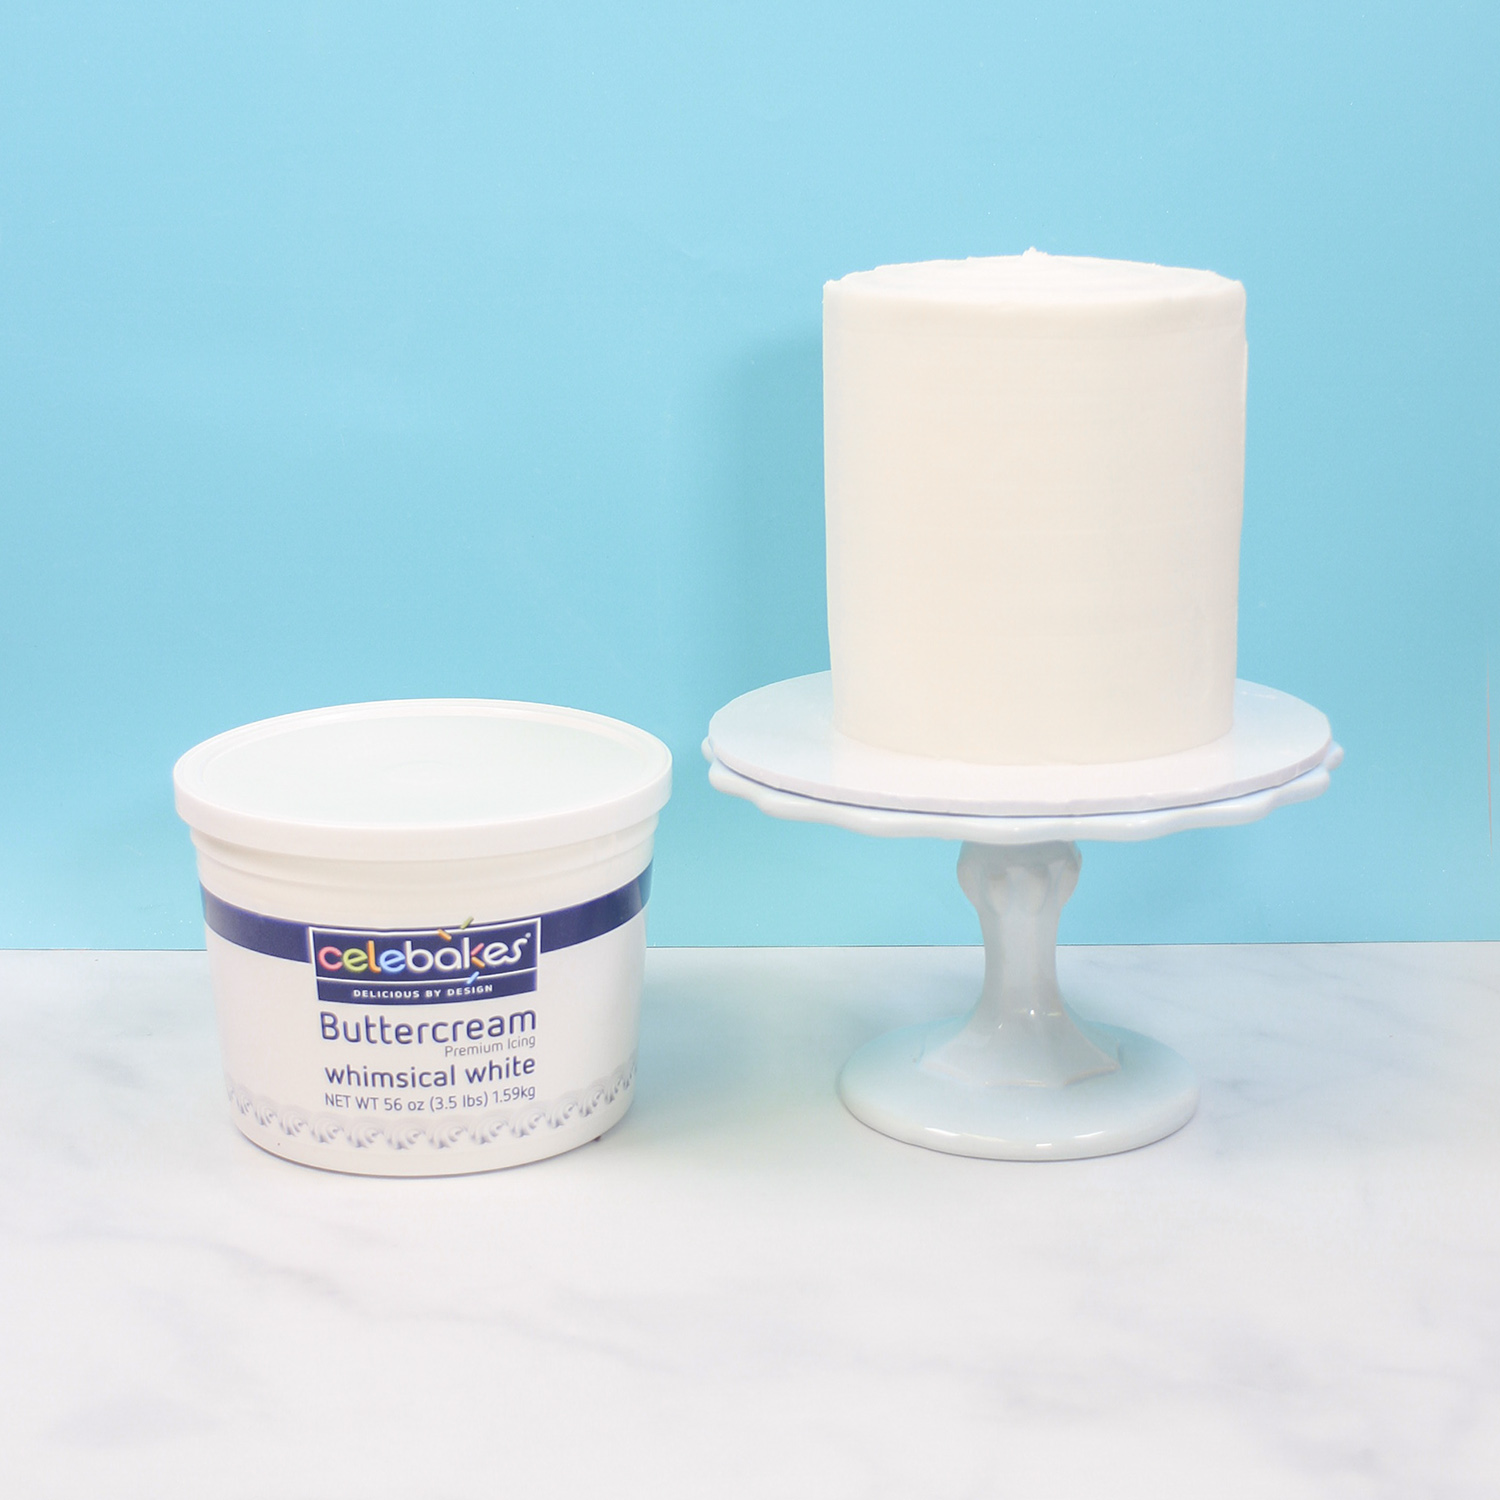 How to Crumb Coat & Frost a Cake